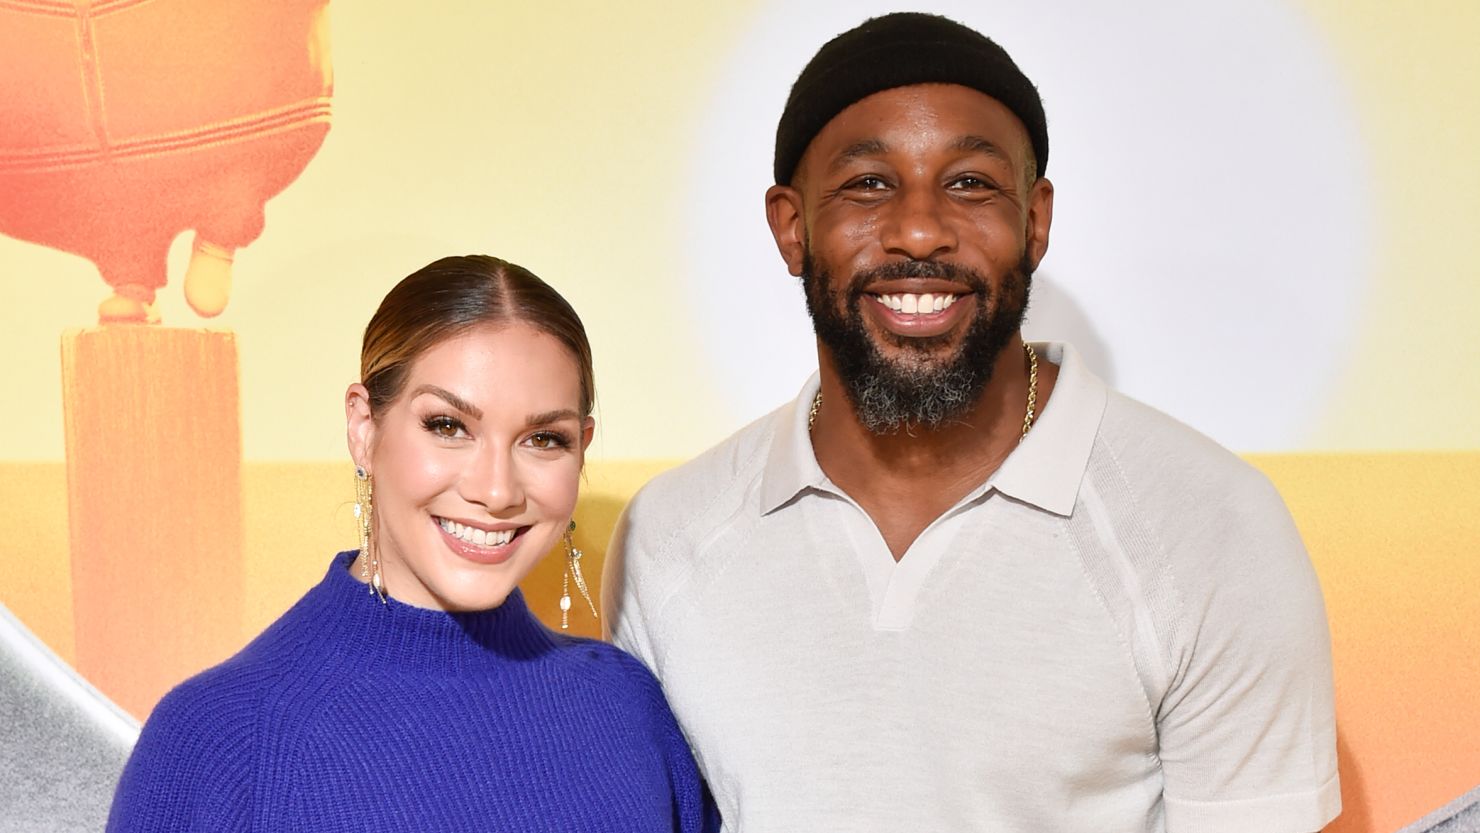 (From left) Allison Holker and Stephen "tWitch" Boss at the Los Angeles premiere of "Minions: The Rise of Gru" in 2022.